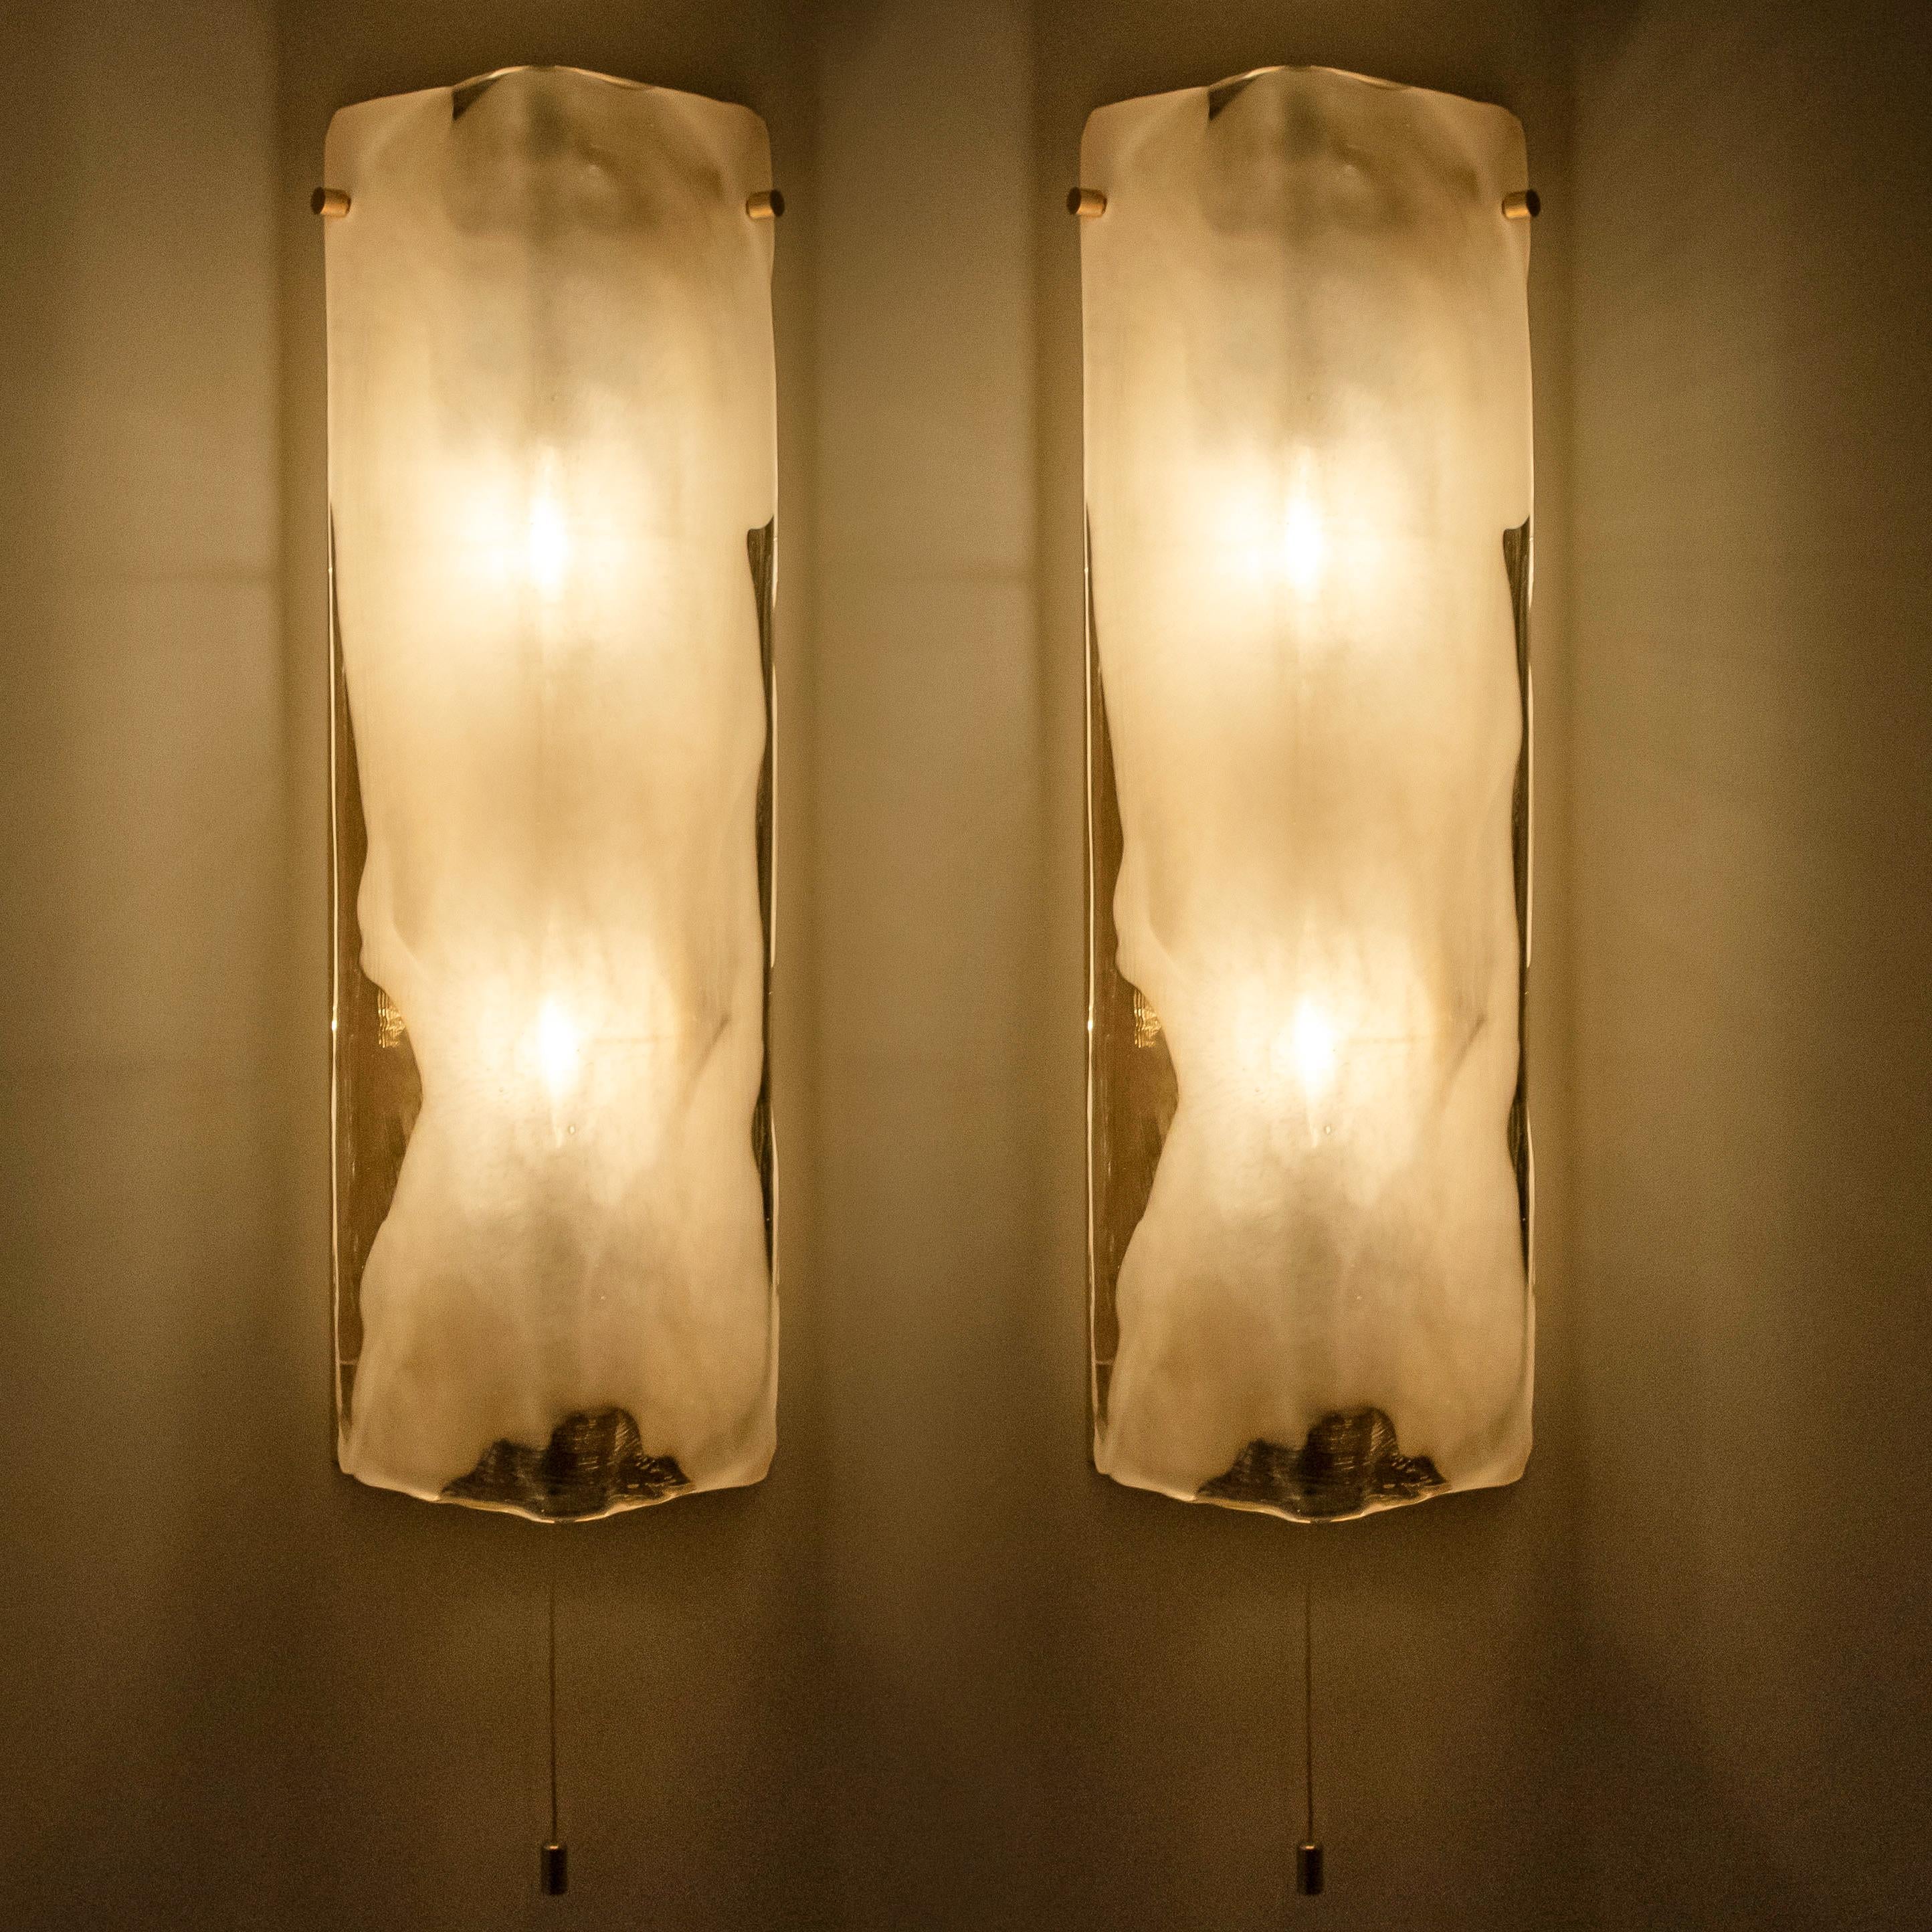 Pair of high end wall sconces made of hand blown clear and white Murano glass on a chrome hardware designed and produced by J.T. Kalmar, Austria in the 1960s. Minimalistic design executed with a taste for excellence in craftsmanship. Statement